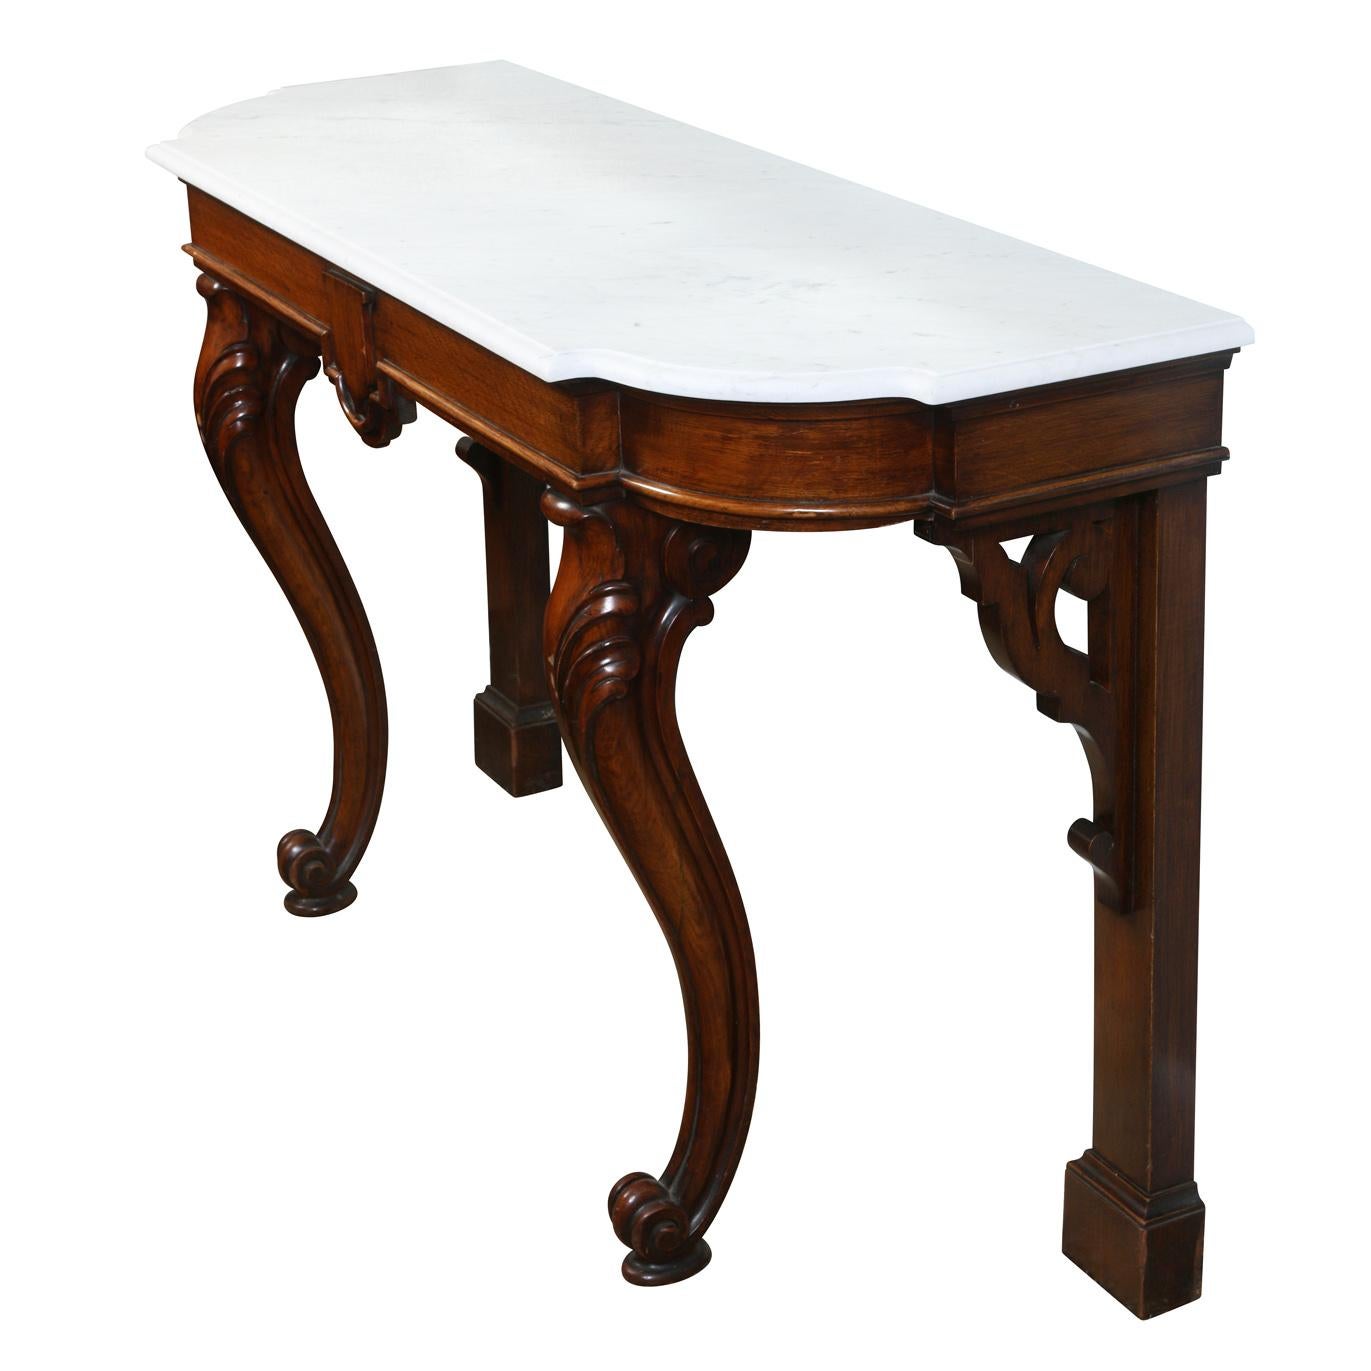 A 19th Century English mahogany console table with shaped marble top, cabriole front legs and carved shield to apron.